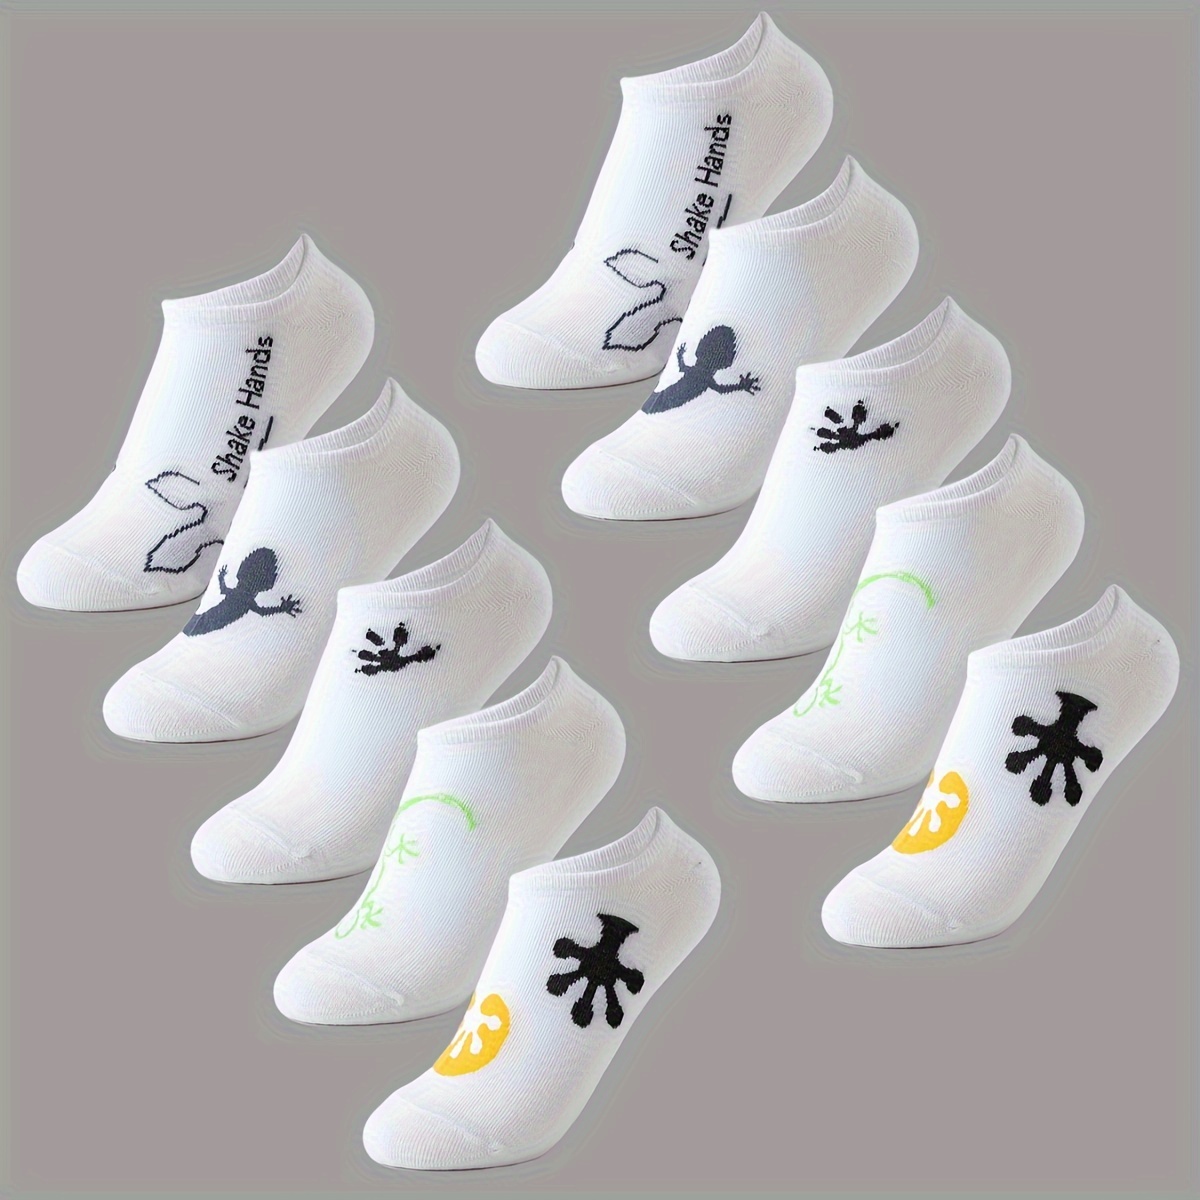 

5 Pairs Of Men's Simple Solid Liner Creative Pattern Anklets Socks, Comfy Breathable Soft Sweat Absorbent Socks For Men's Outdoor Wearing